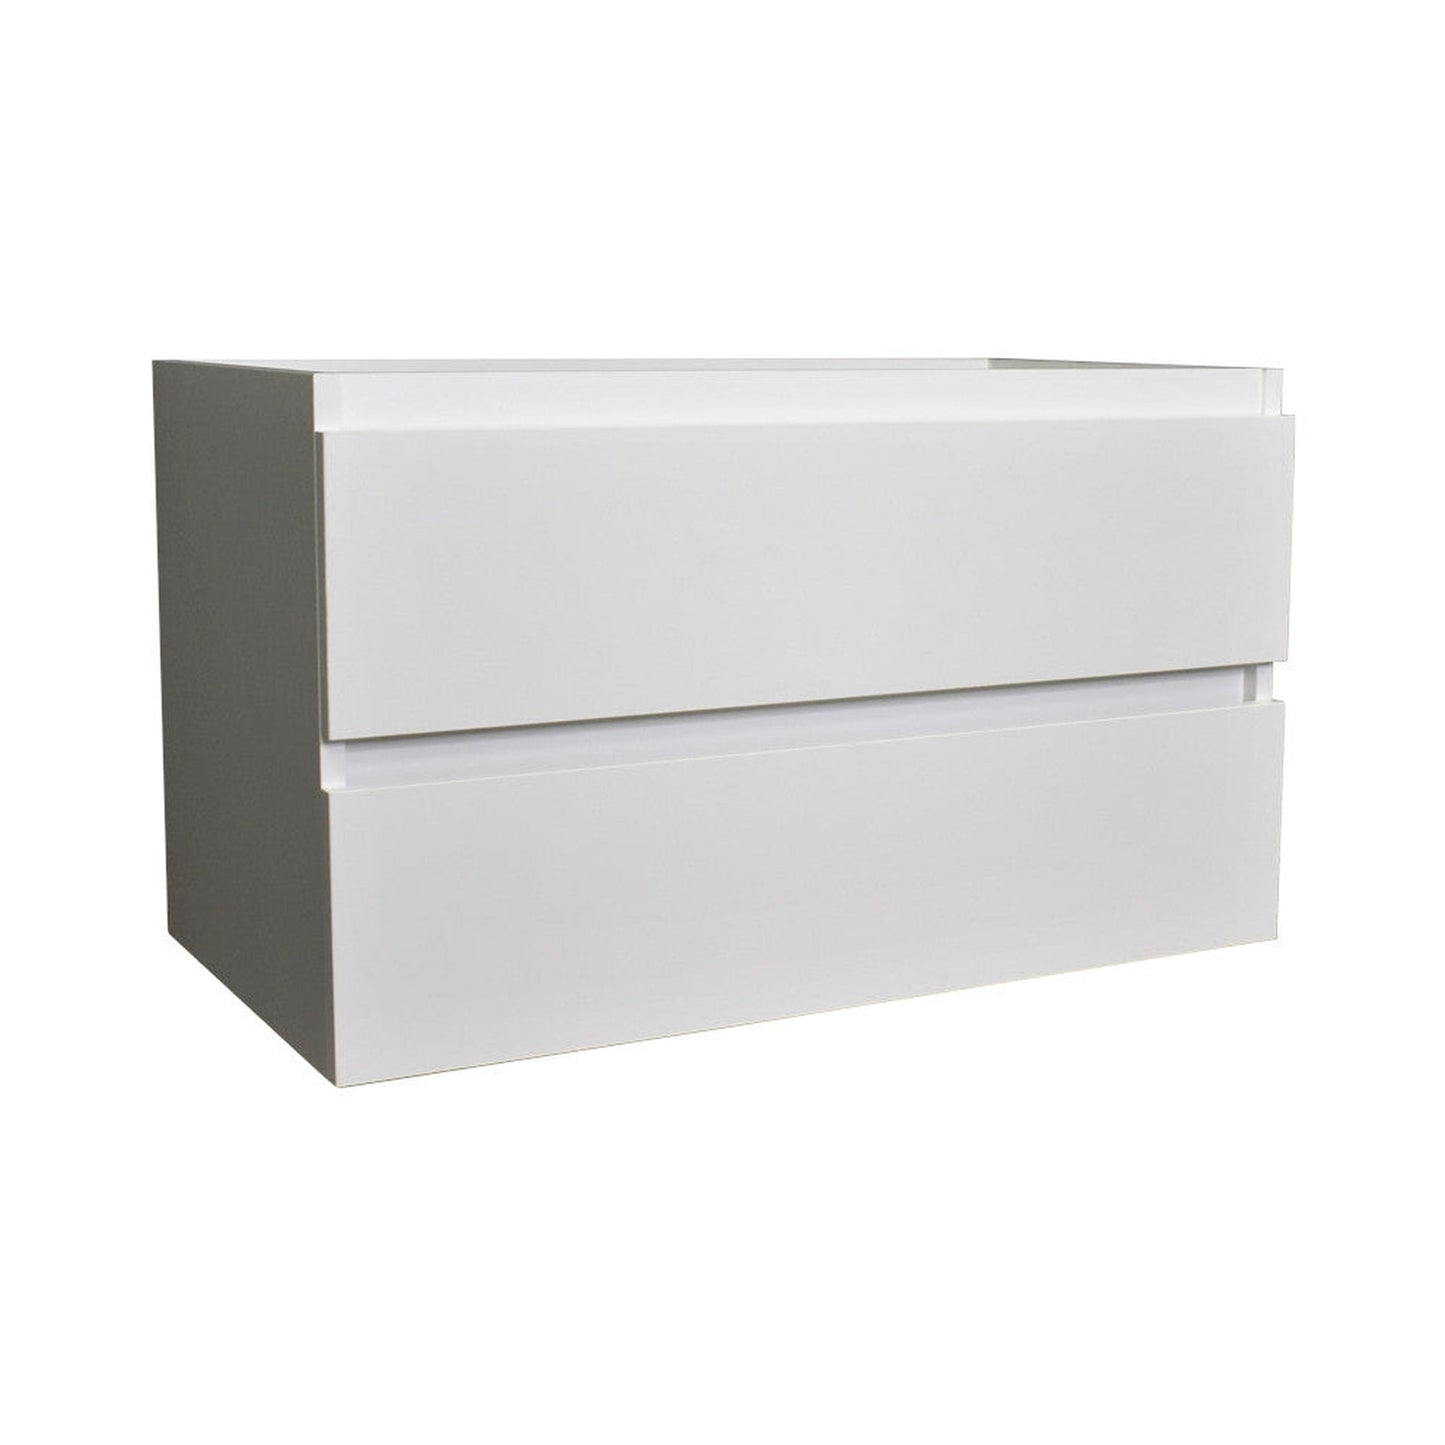 Volpa USA Salt 36" x 20" White Wall-Mounted Floating Bathroom Vanity Cabinet with Drawers